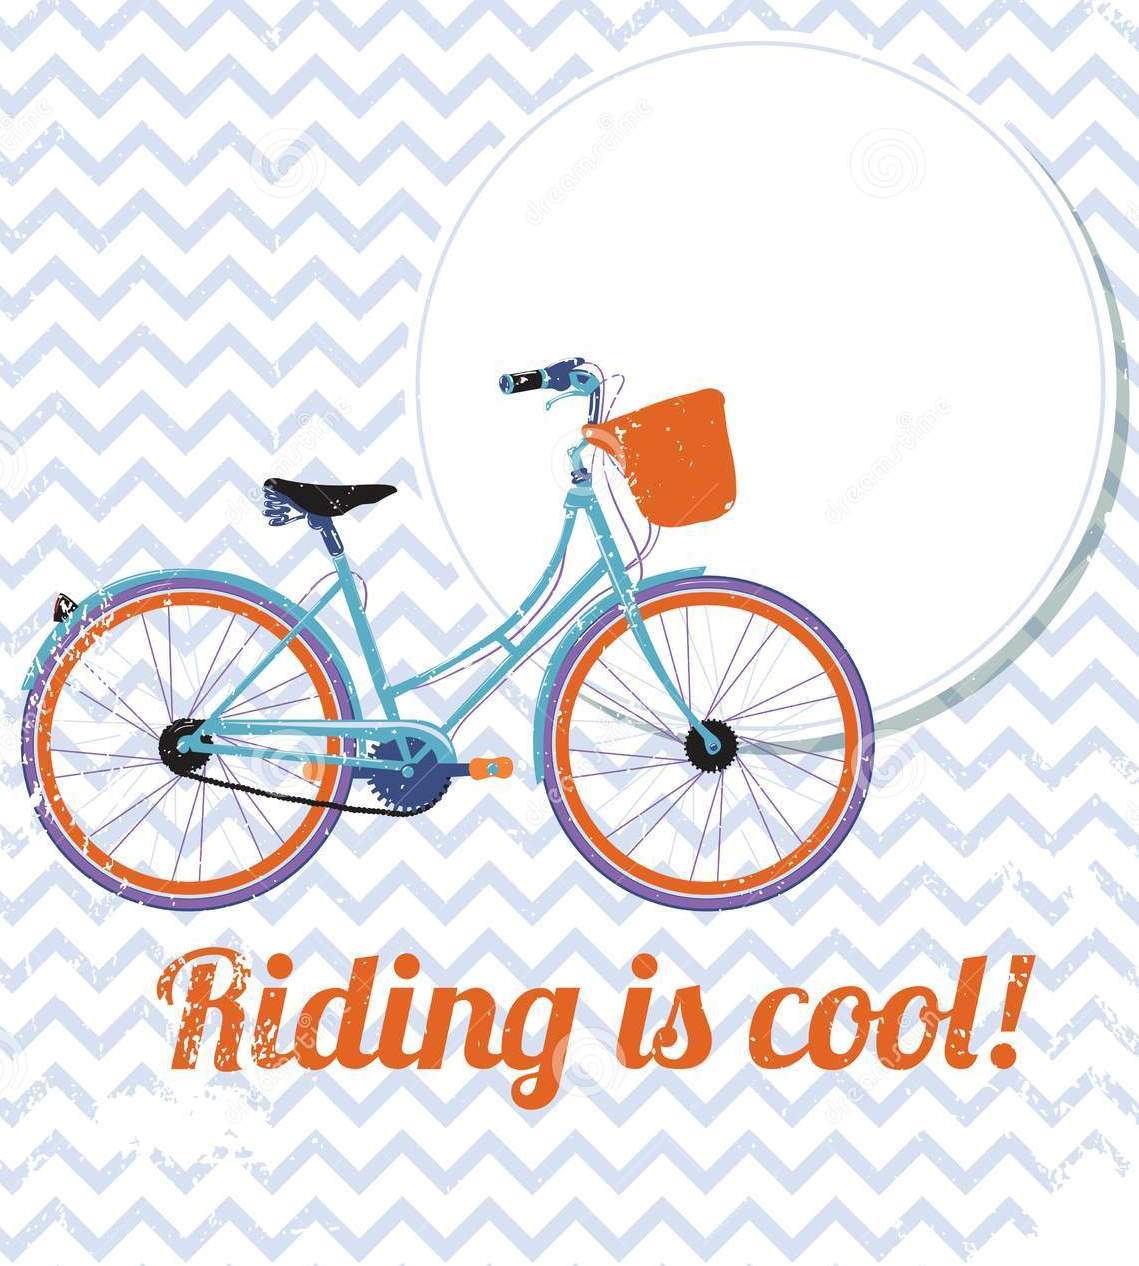 riding cool retro bicycle poster vector illustration